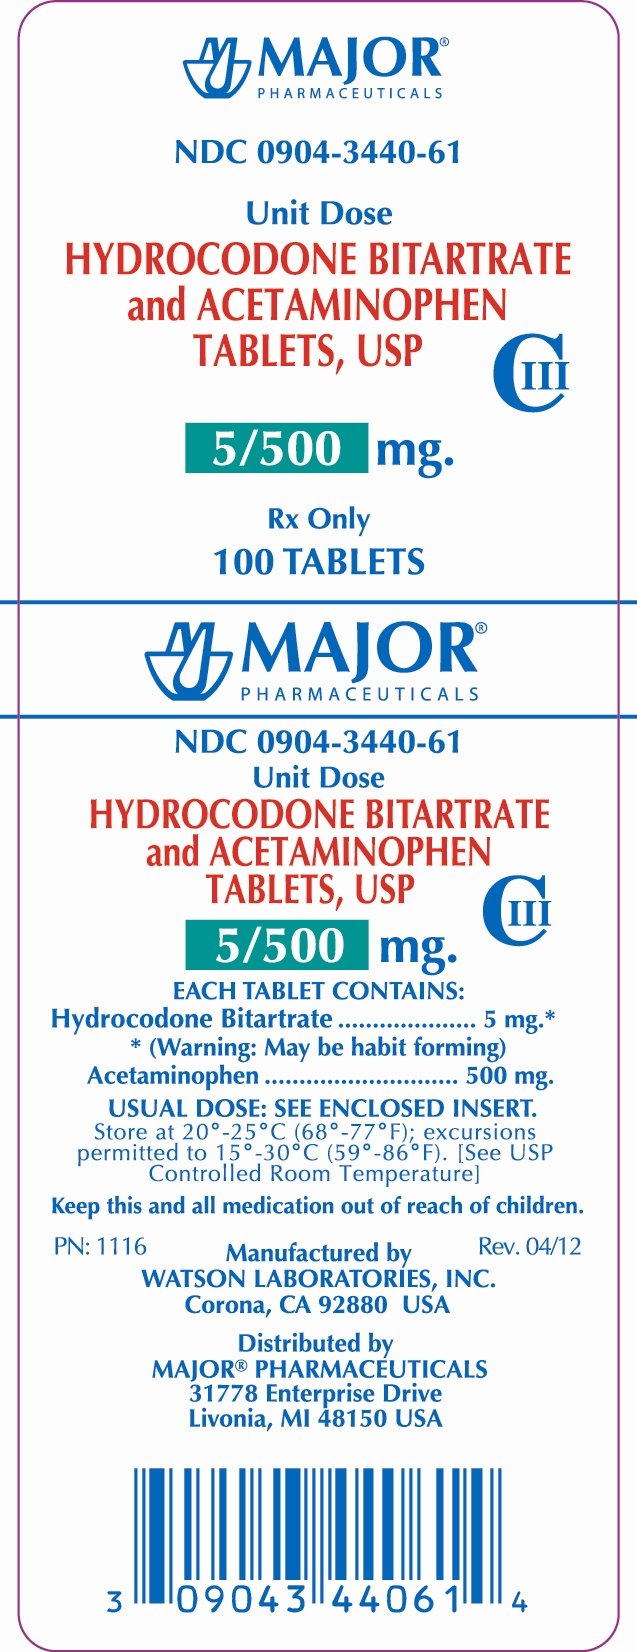 HYDROCODONE BITARTRATE AND ACETAMINOPHEN TABLETS USP 5/500MG